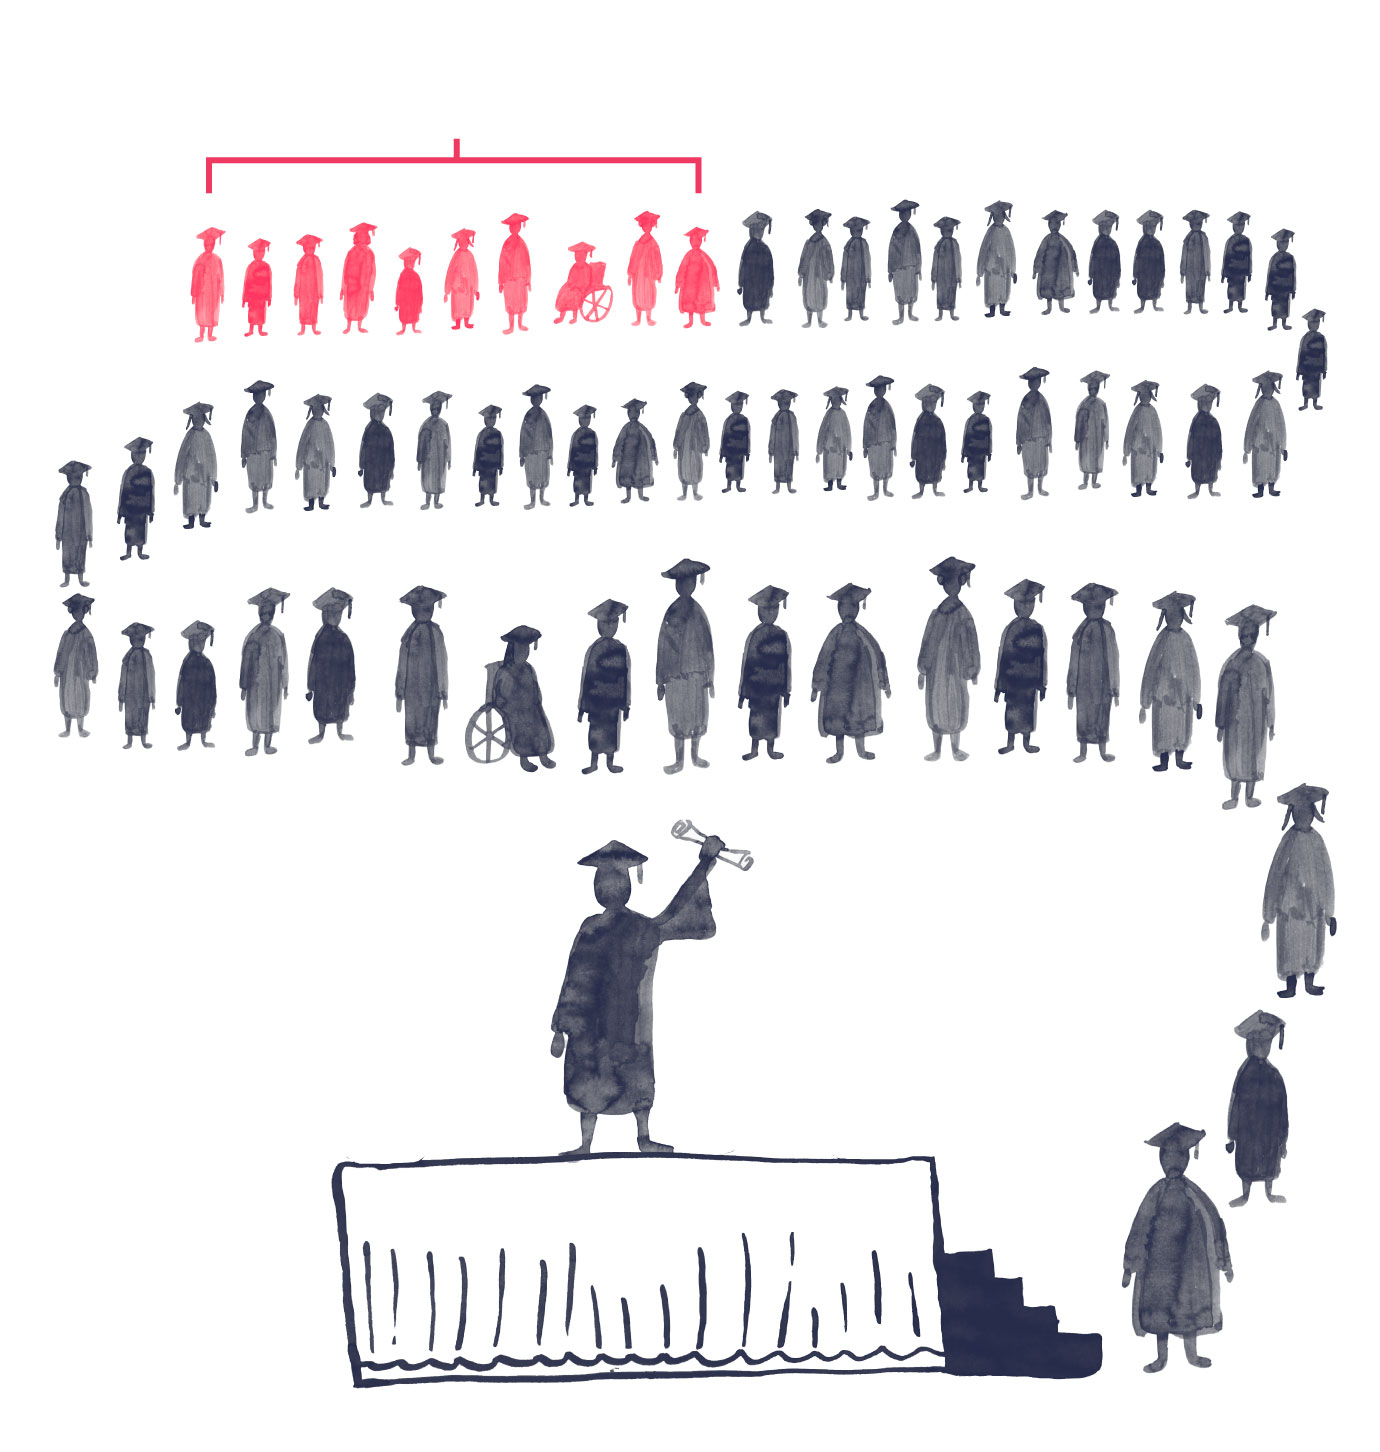 Illustration of a line of students snaking, with one student holding a diploma at the end